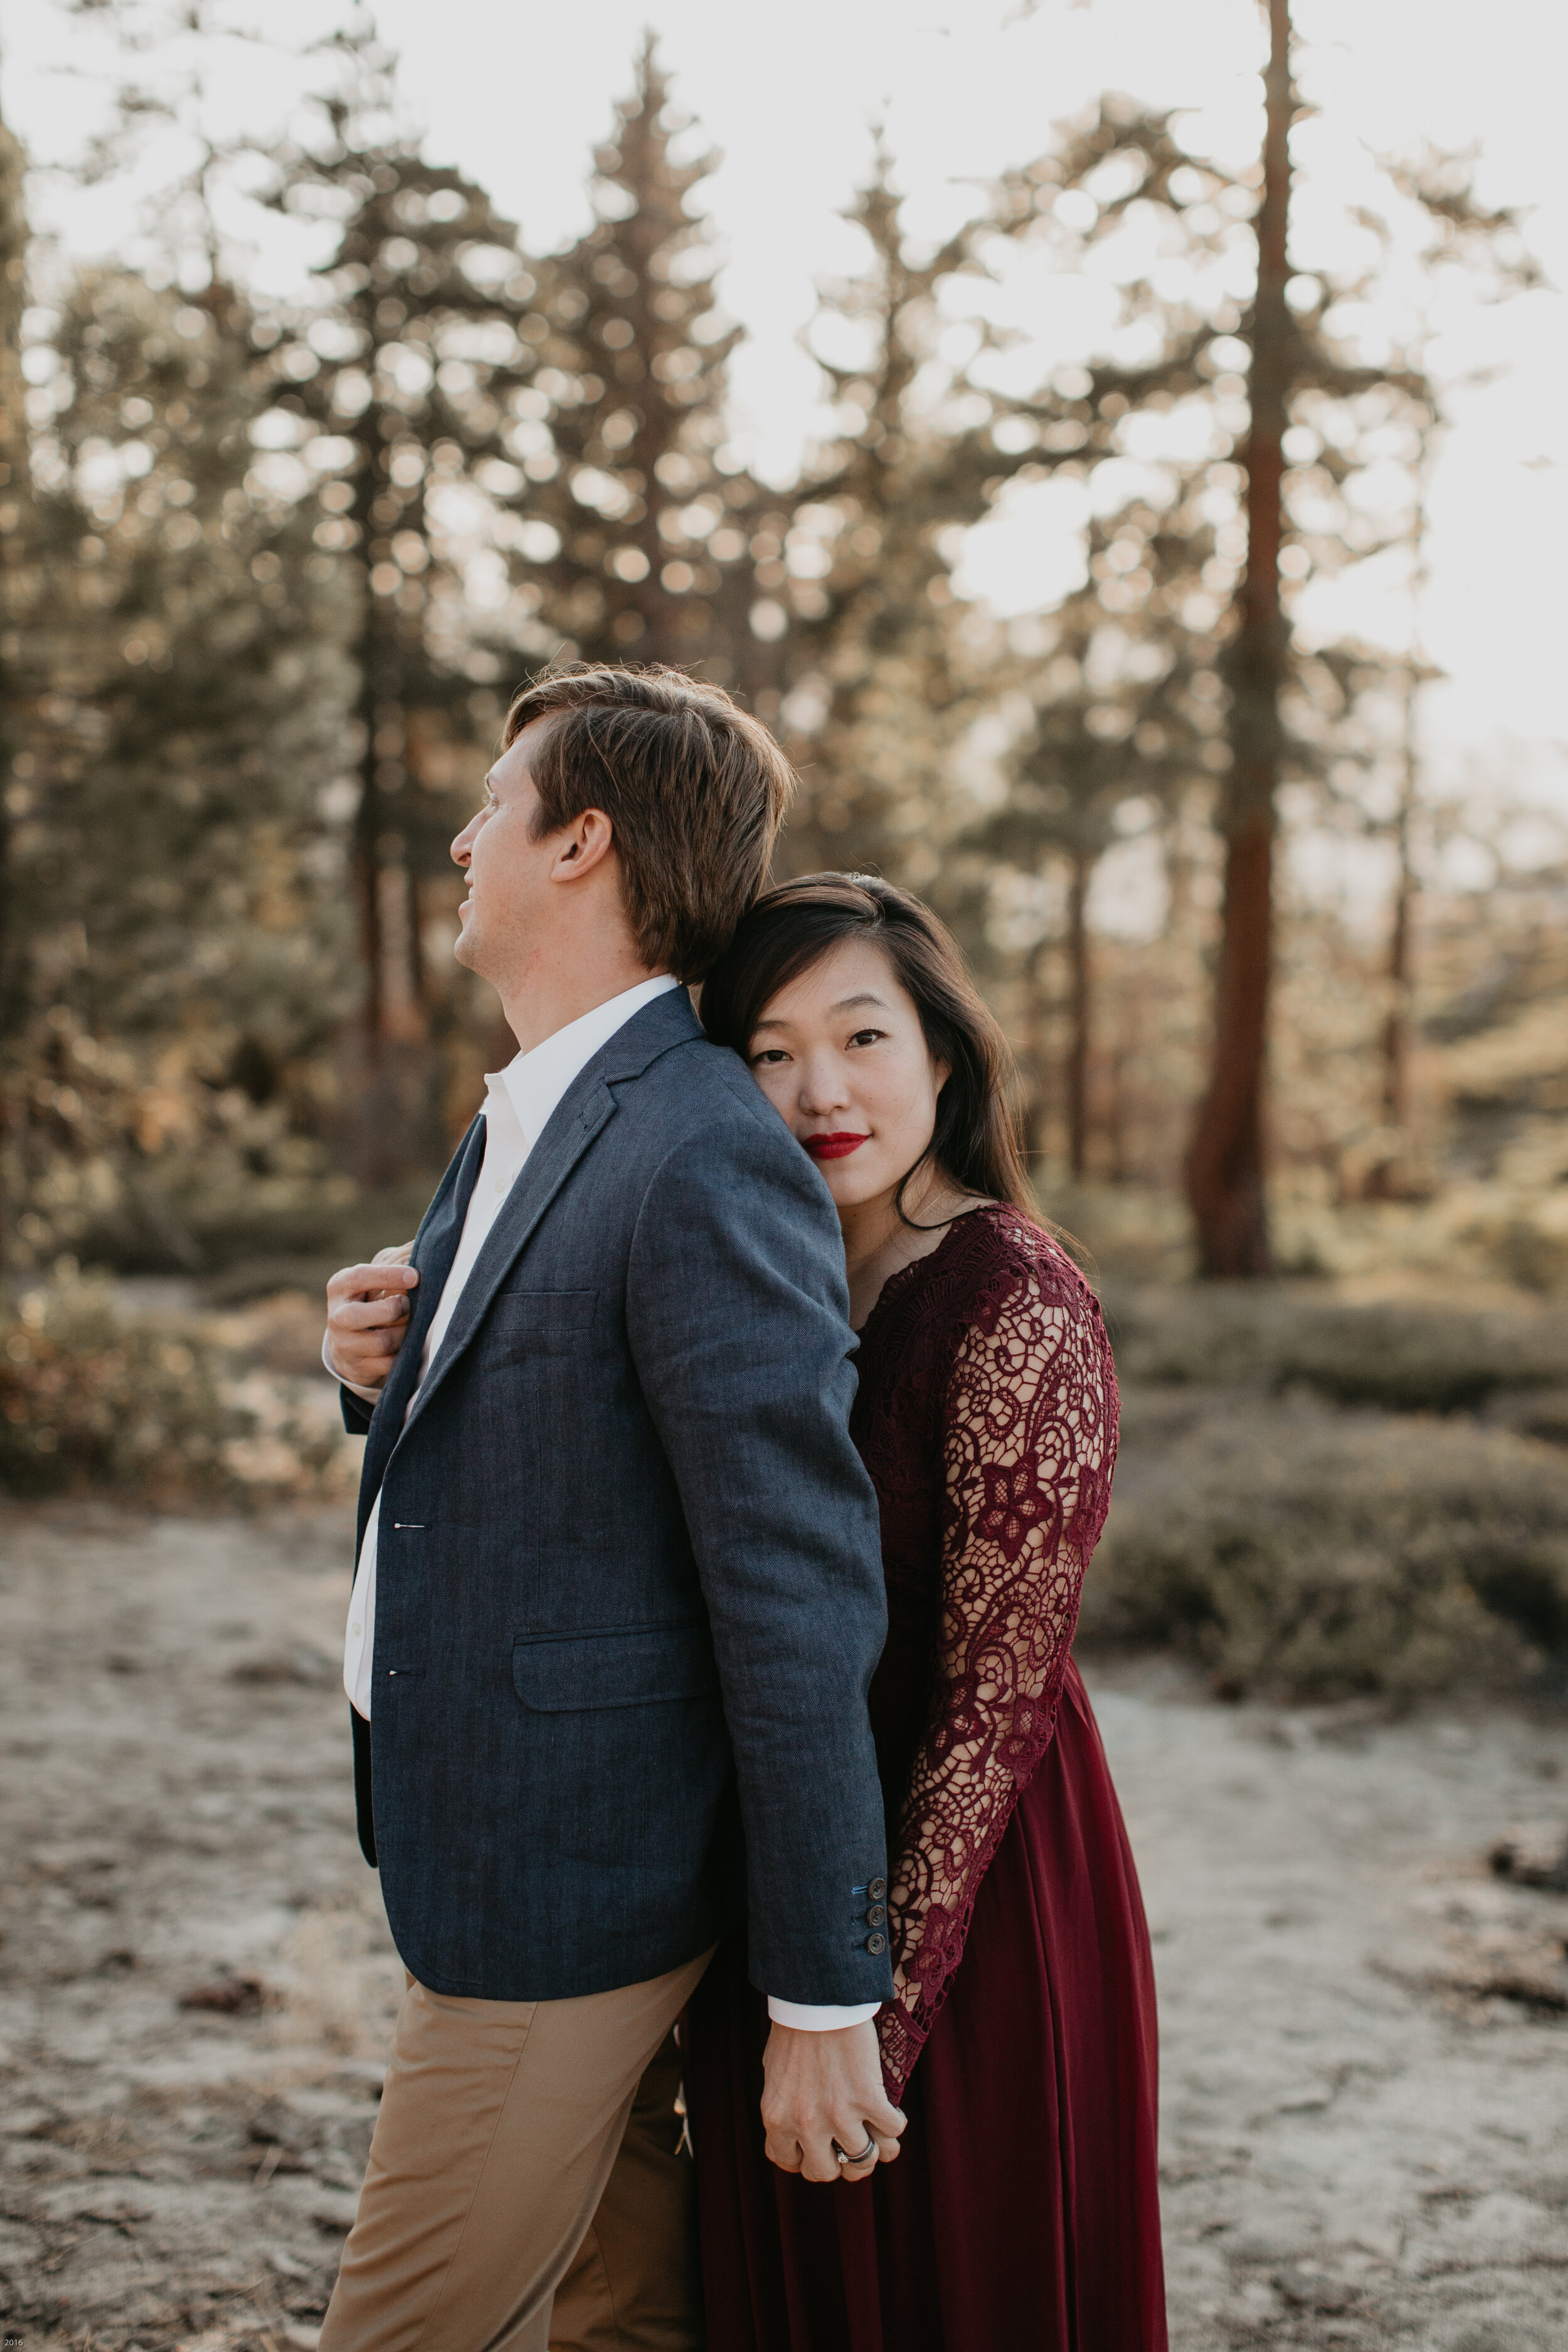 yosemite-national-park-couples-session-at-taft-point-and-yosemite-valley-yosemite-elopement-photographer-nicole-daacke-photography-121.jpg